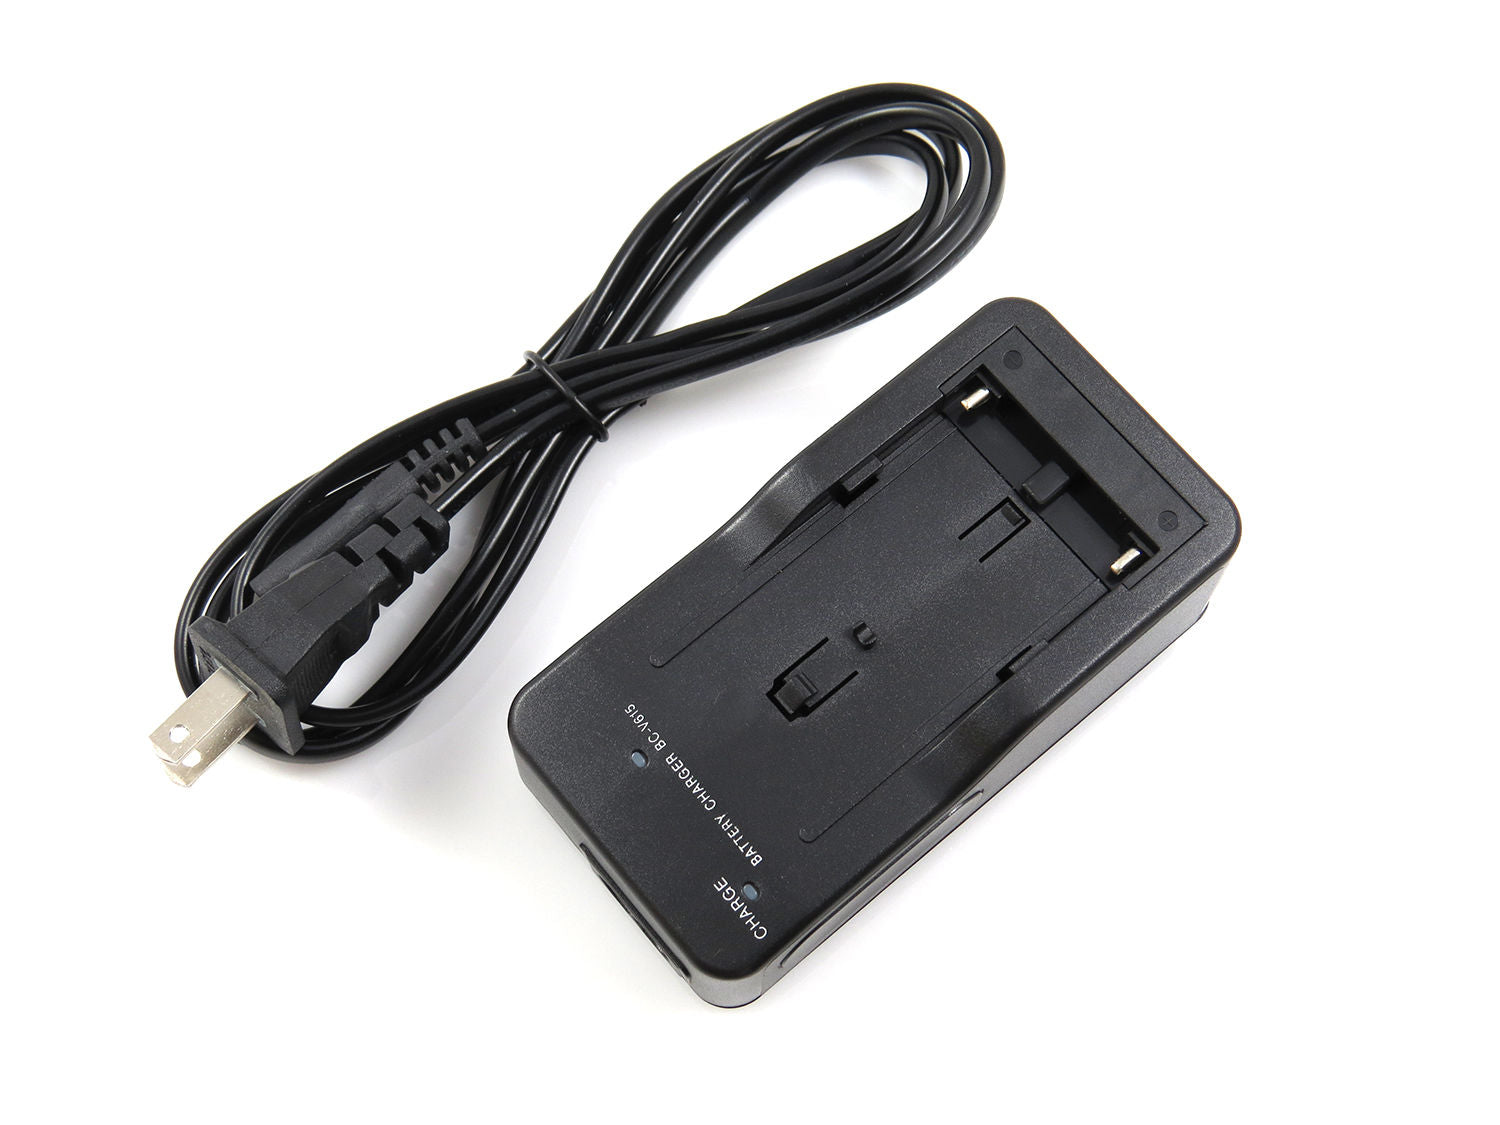 BC-V615 Battery Charger AC Adapter for Sony NP-F960 NP-F970 NP-F770 NP-F550